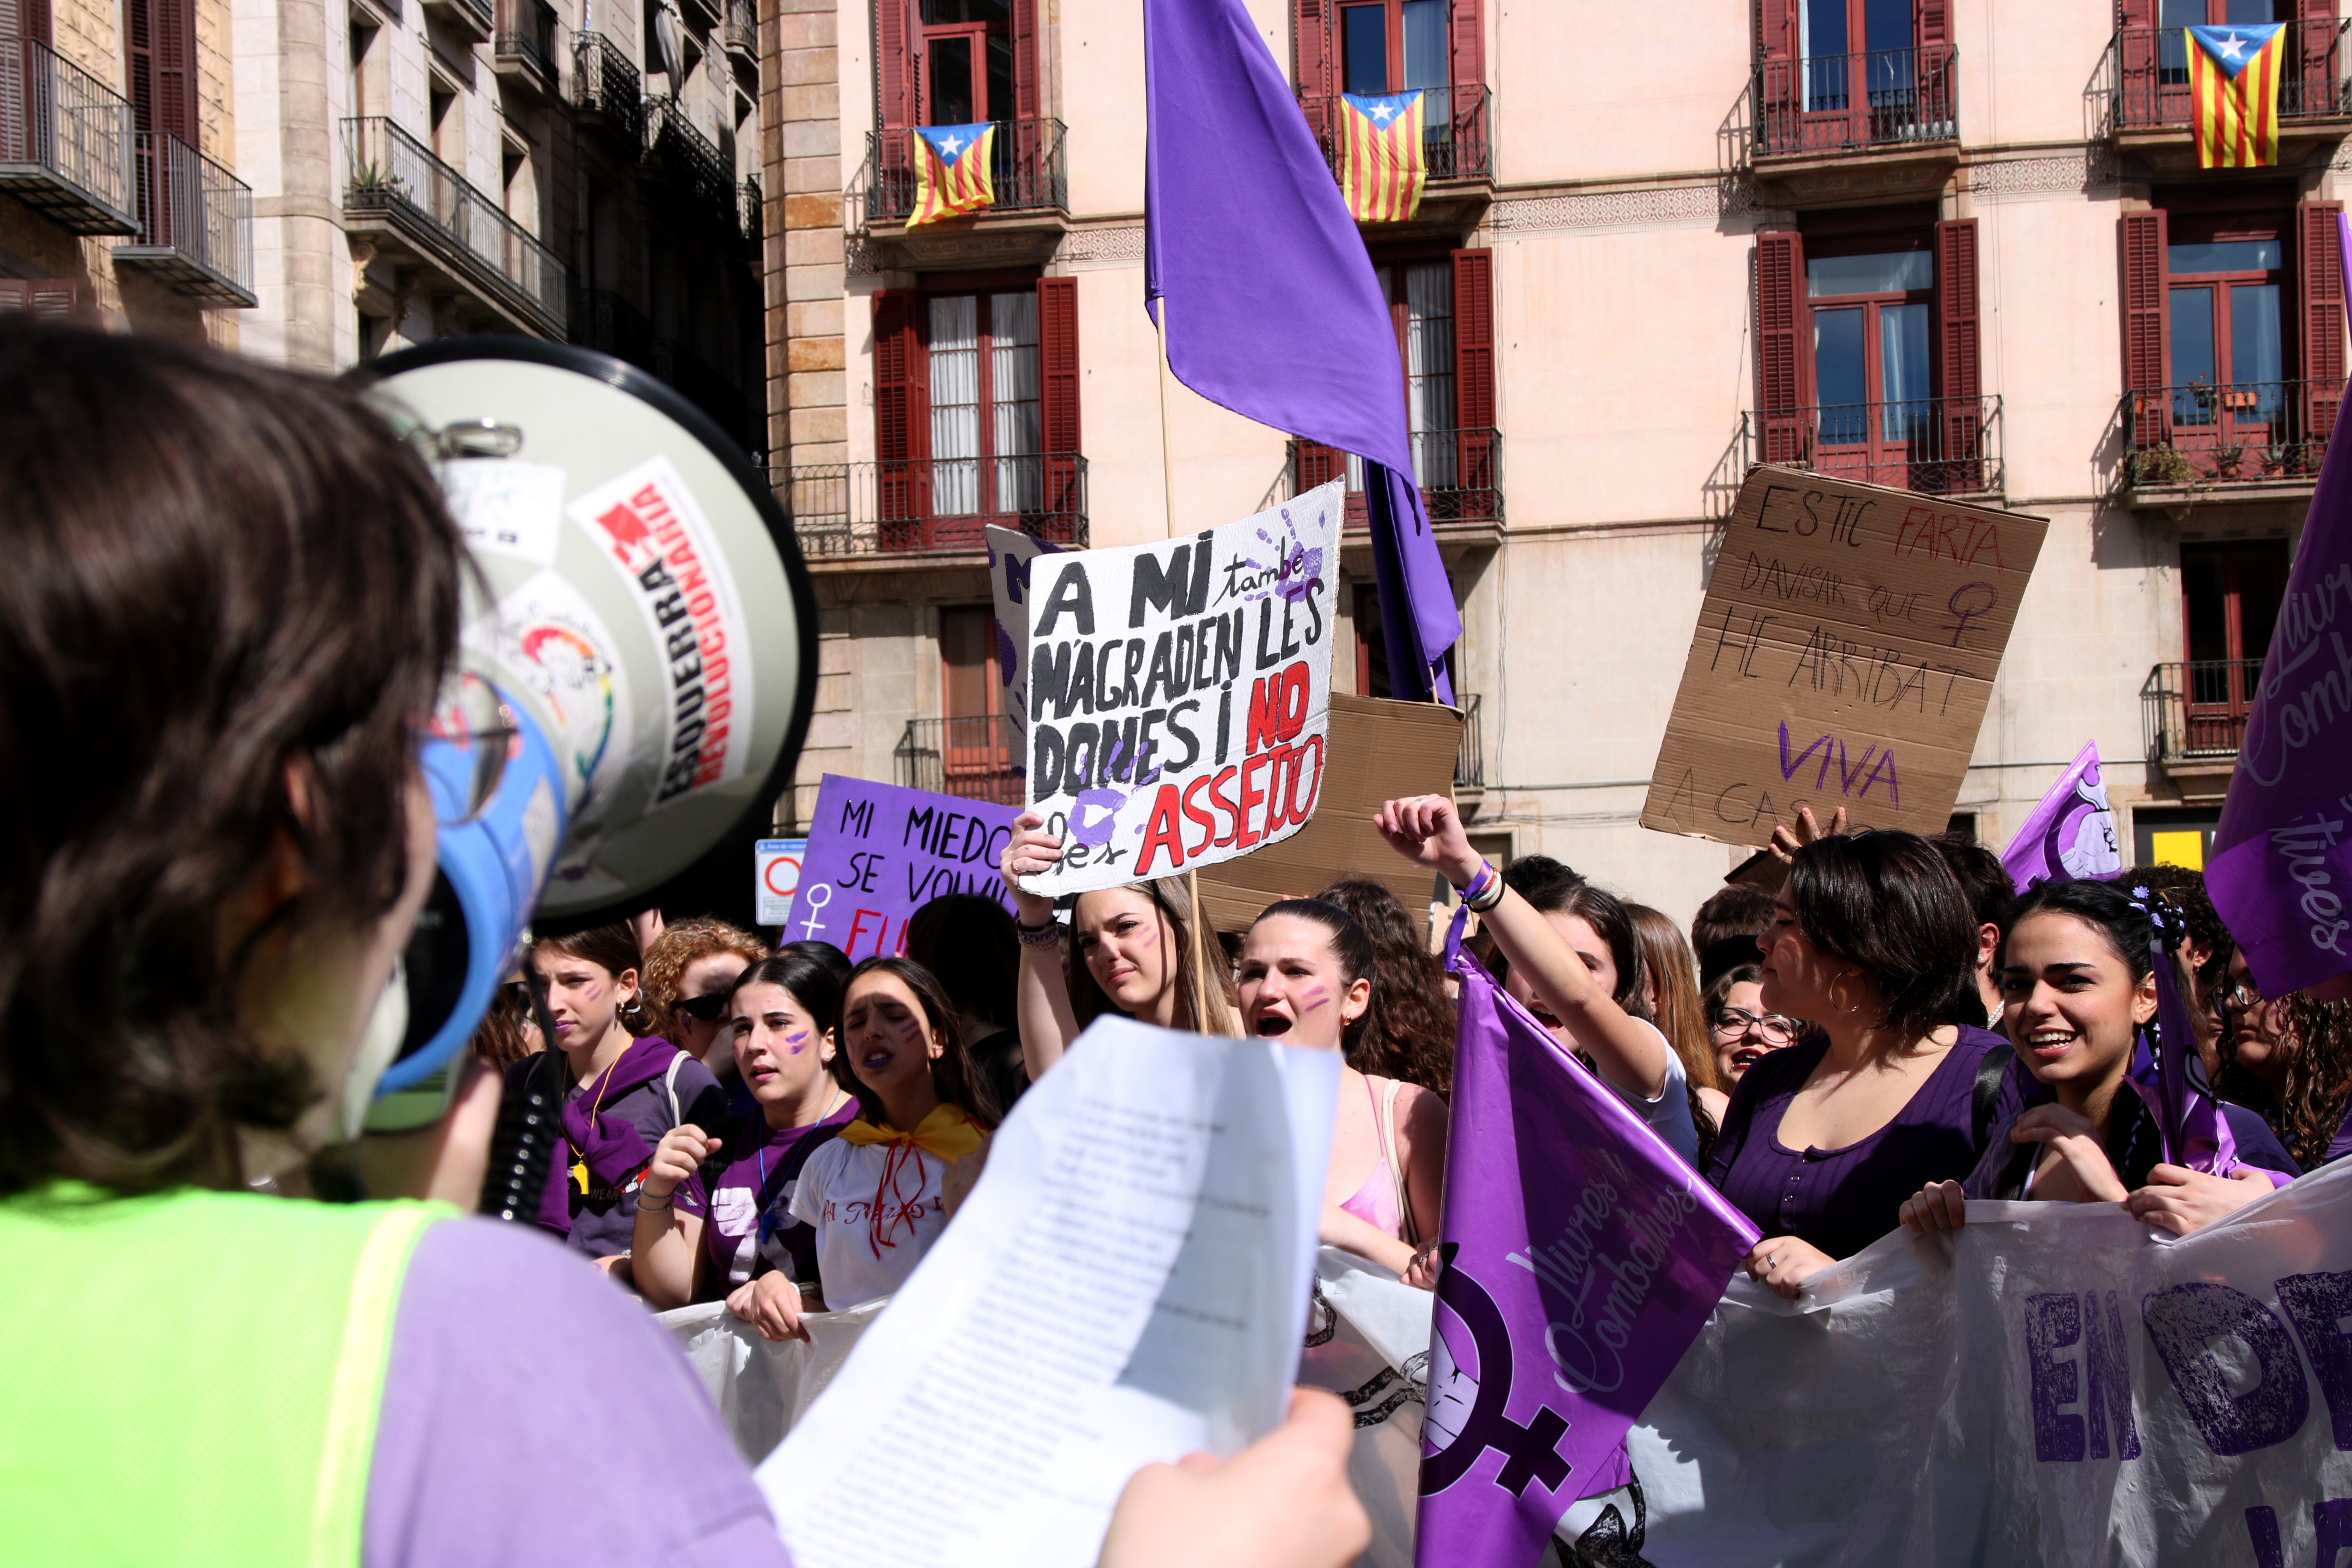 Students protesting for International Women's Day in front of the Barcelona city council and Catalan government headquarters buildings